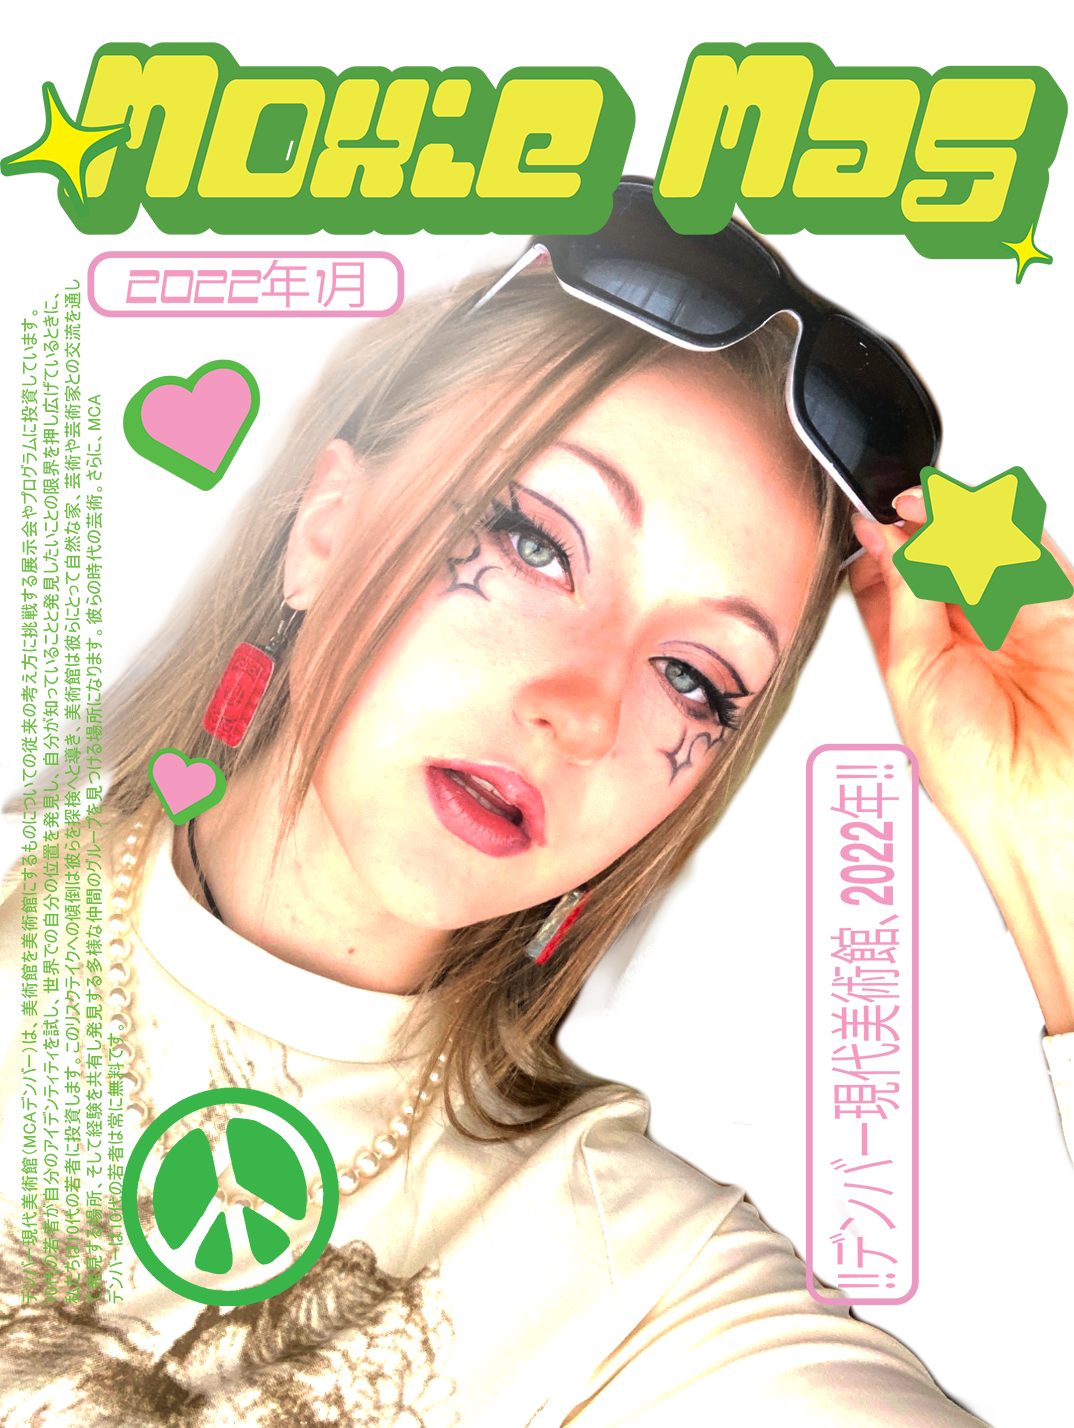 January 2022 cover of MCA Denver’s teen publication titled “MoxieMag.” The cover features a portrait of an individual, presumably a teen, whose lips are pursed, whose eyeliner is dramatic, and whose sunglasses are on top of their head. The font is retro and bubble-like, and there are symbols like stars and hearts dispersed on the cover.